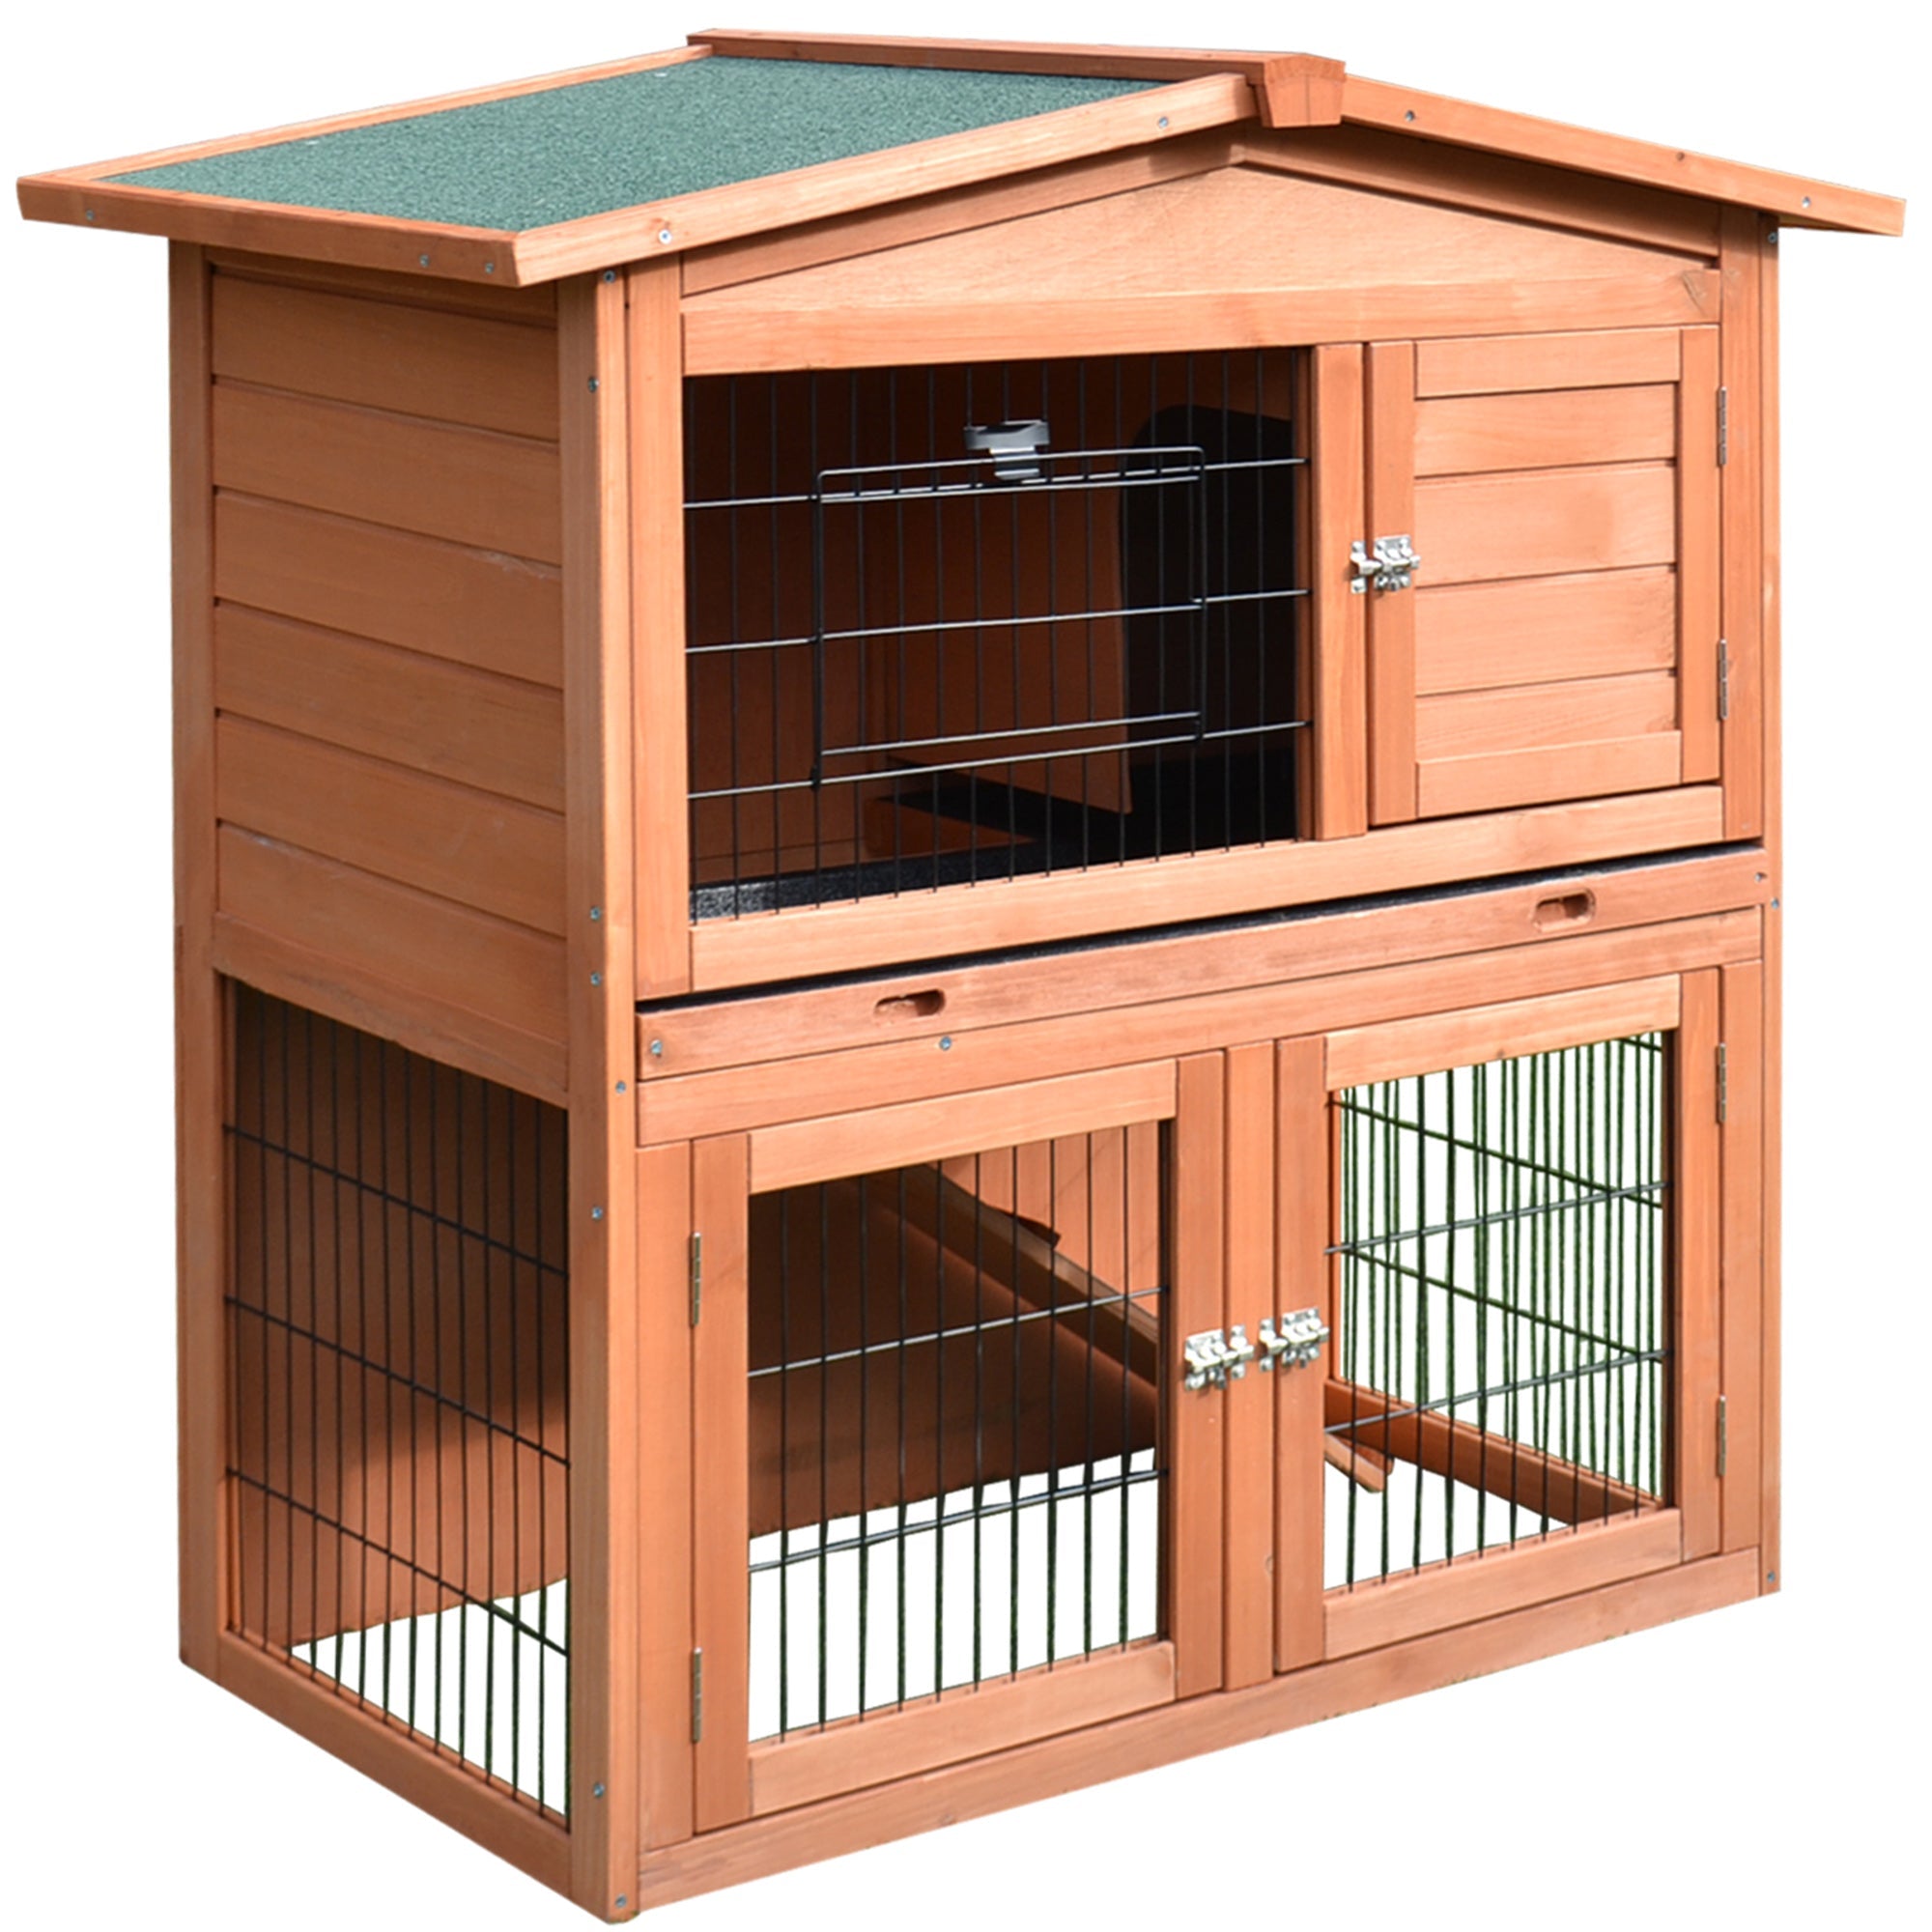 2 Tier Rabbit Hutch Guinea Pig Hutch Ferret Cage with Ramp Slide Out Tray for Indoor Outdoor 100.5 x 55 x 101 cm-0